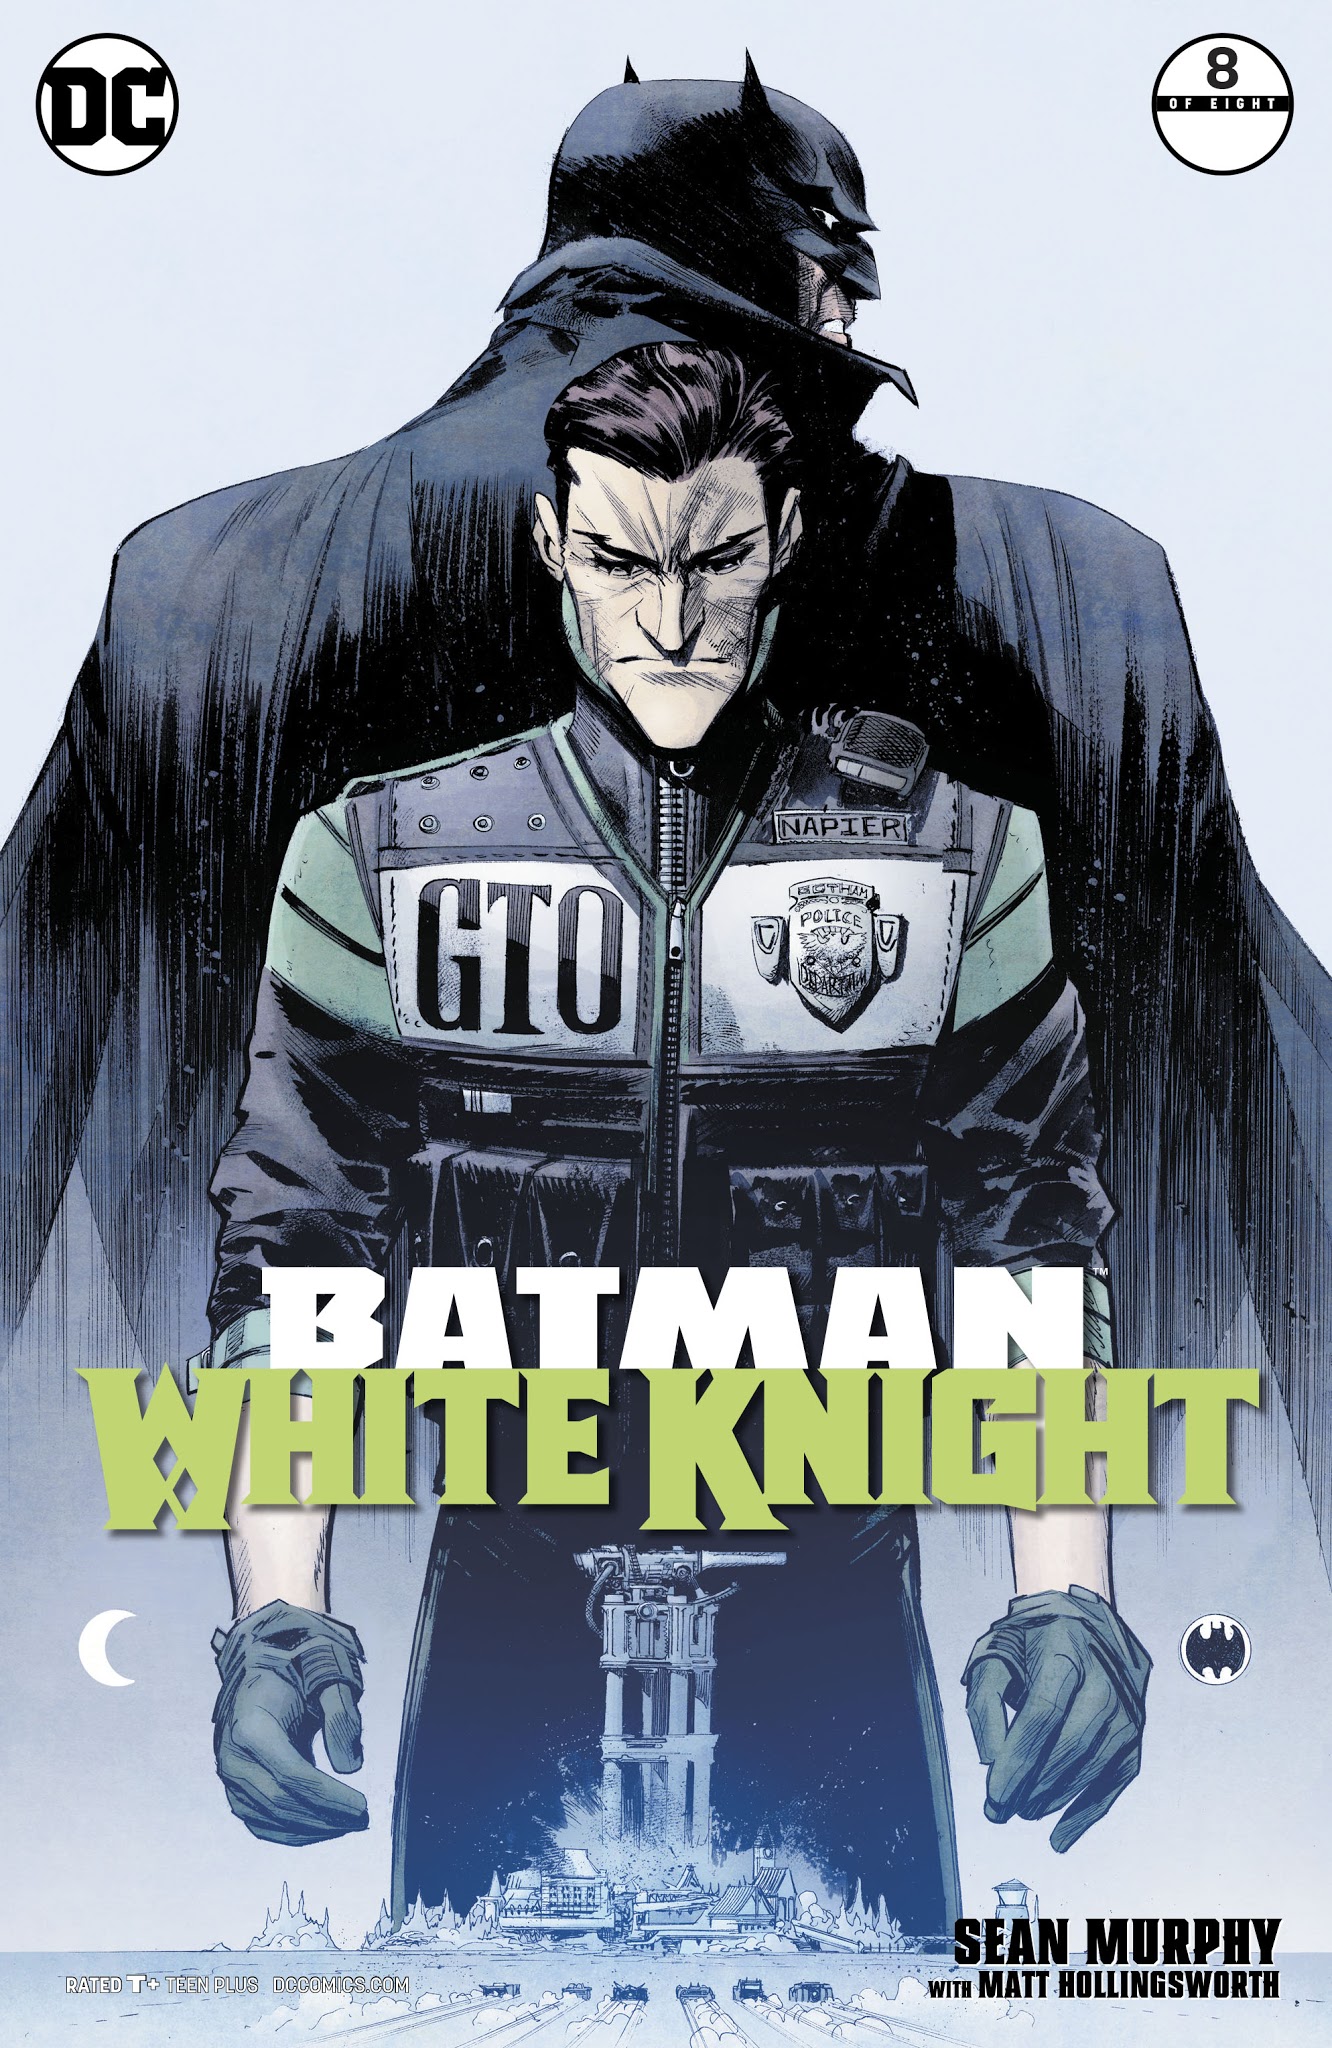 Batman White Knight Issue 8 | Read Batman White Knight Issue 8 comic online  in high quality. Read Full Comic online for free - Read comics online in  high quality .|